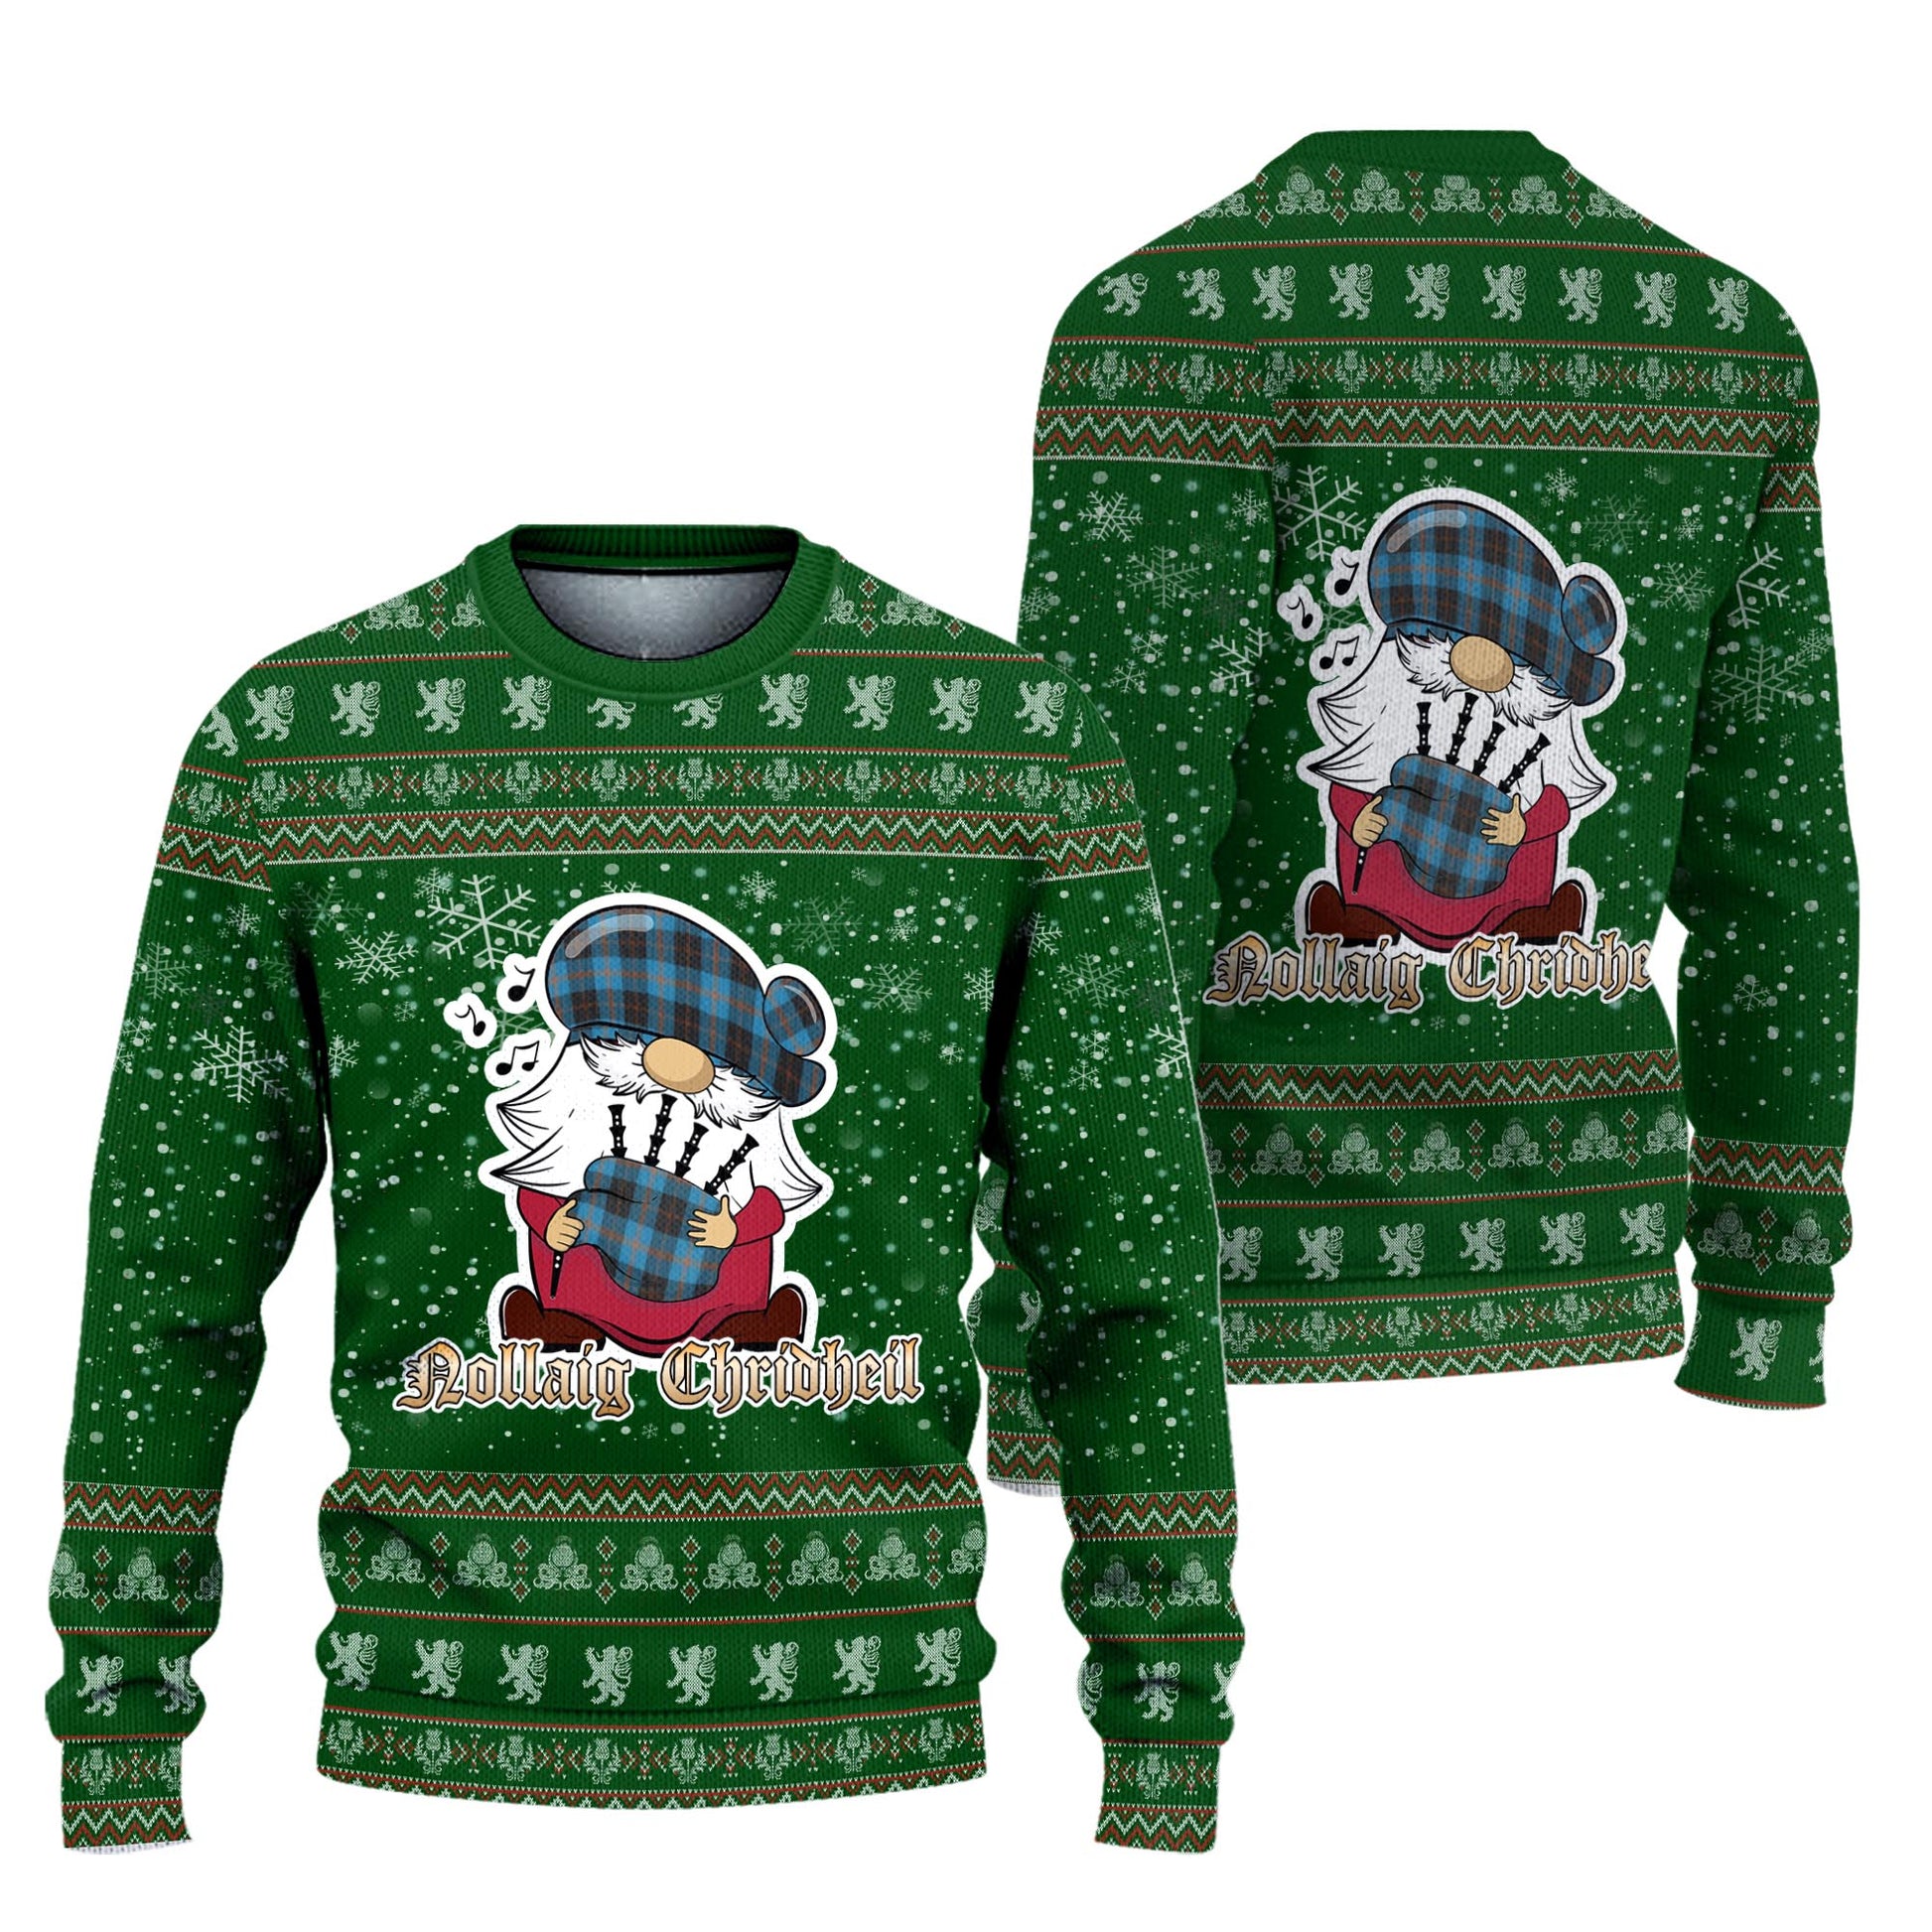 Garden Clan Christmas Family Knitted Sweater with Funny Gnome Playing Bagpipes Unisex Green - Tartanvibesclothing